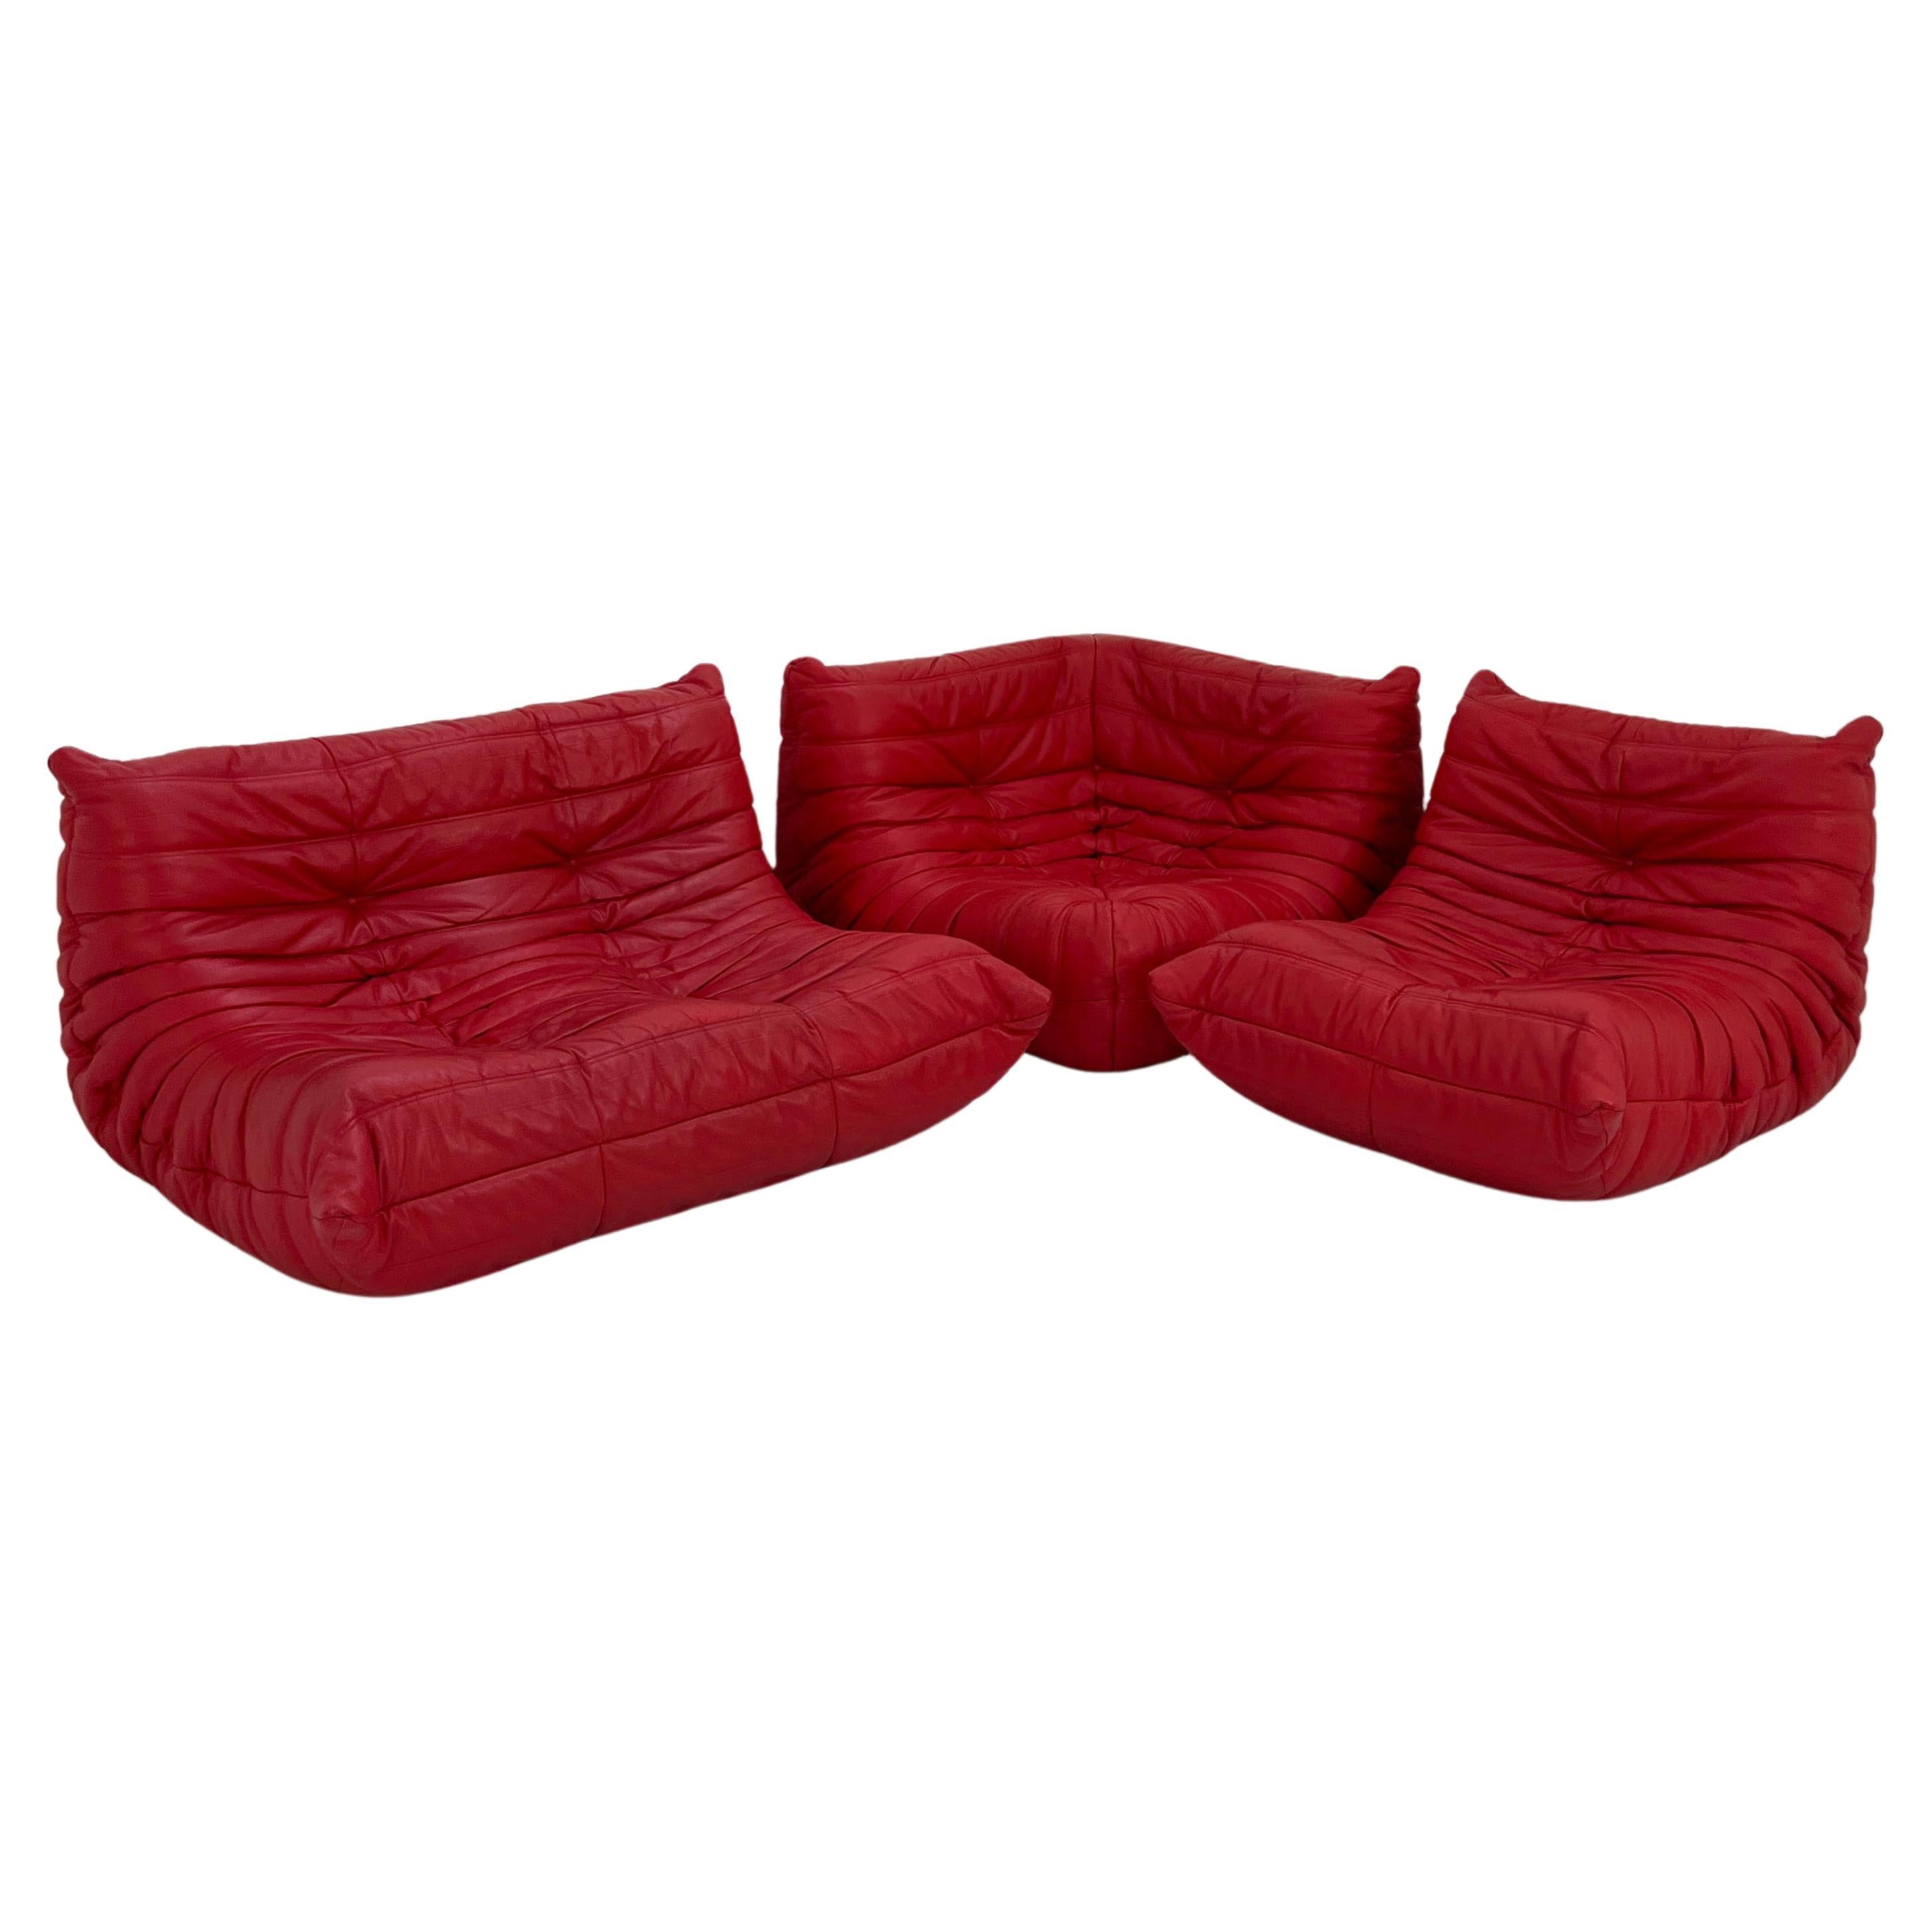 Togo Sofa Set in Red Leather by Michel Ducaroy for Ligne Roset, 1970s